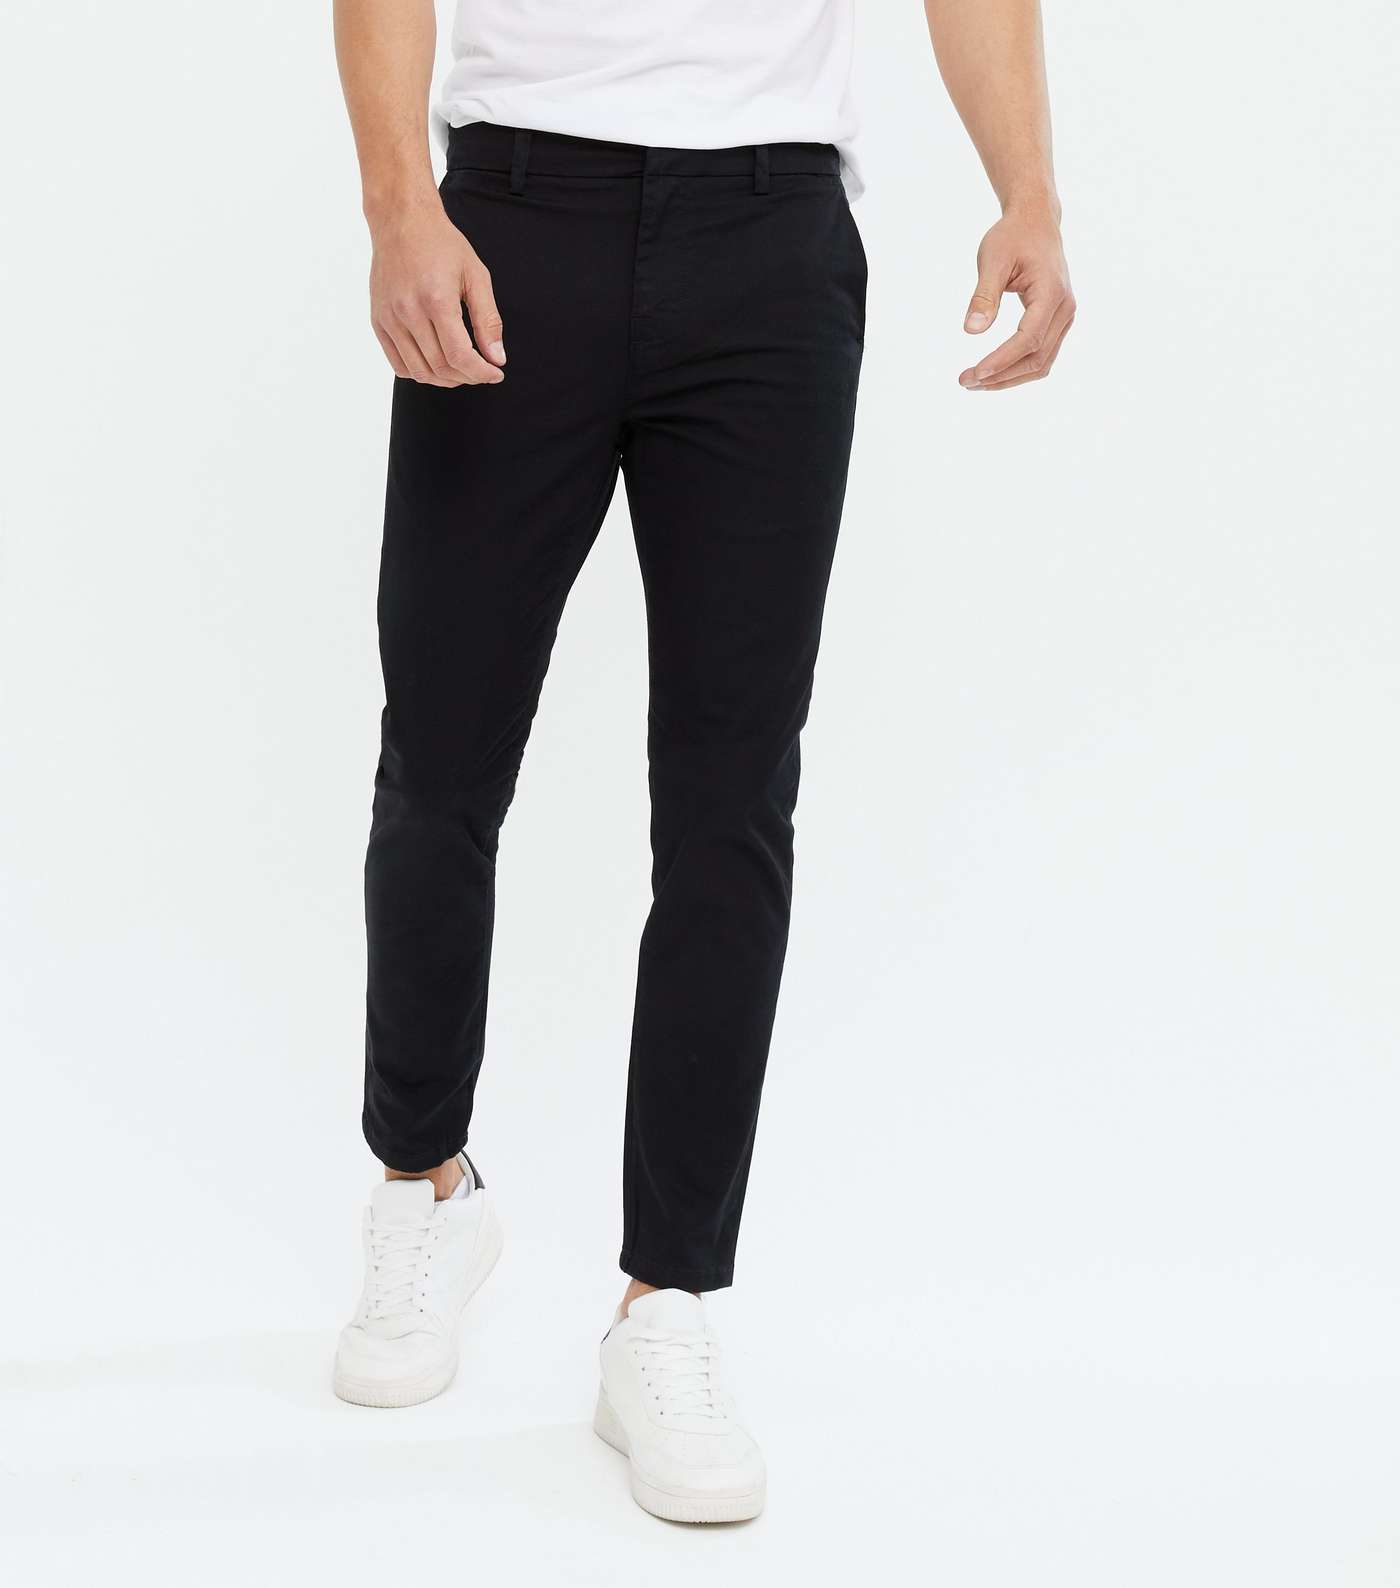 Black Skinny Stretch Cropped Trousers Image 2